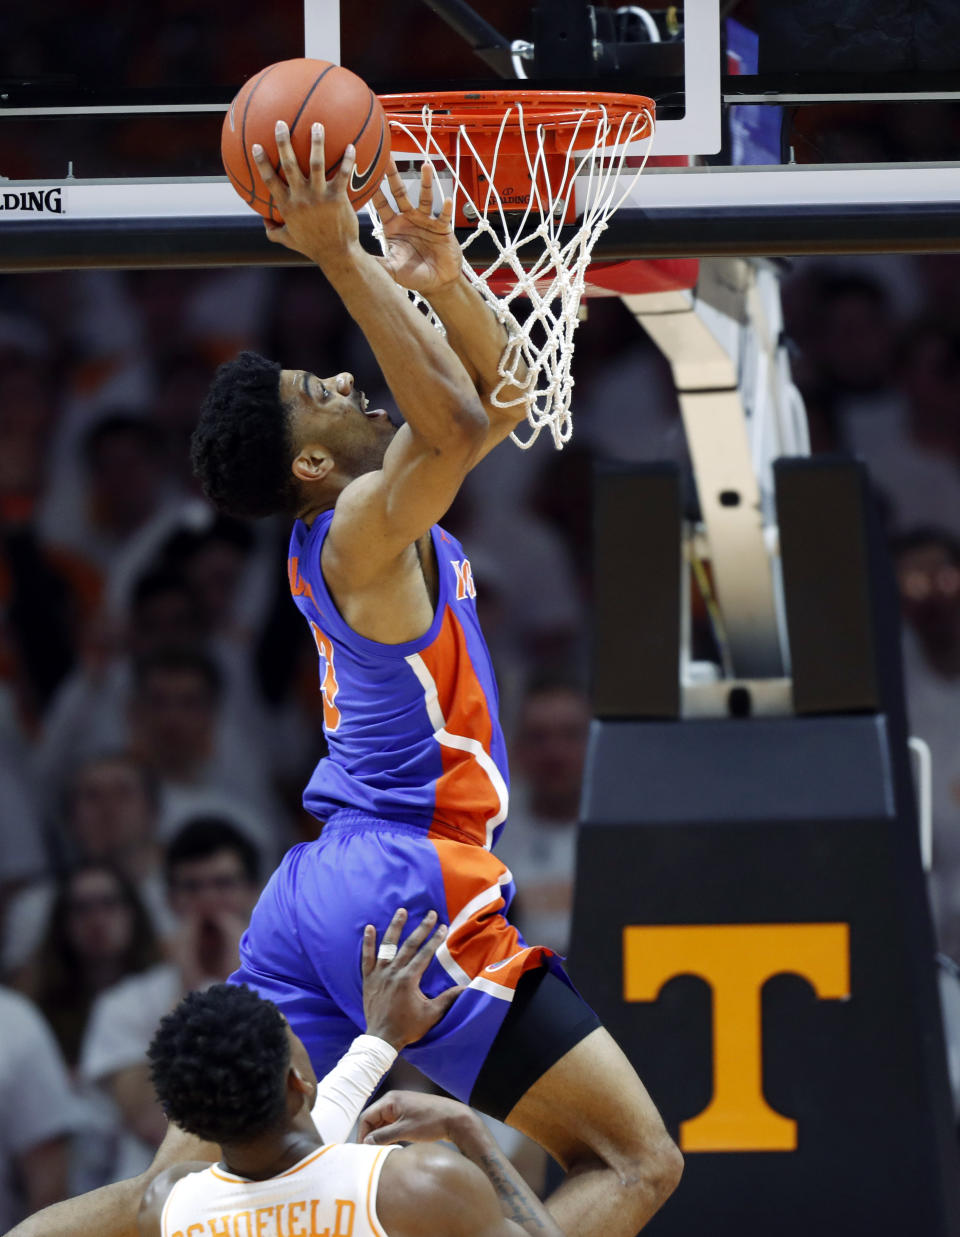 Florida guard Jalen Hudson (3) attempts a dunk during the first half of an NCAA college basketball game against Tennessee, Saturday, Feb. 9, 2019, in Knoxville, Tenn. (AP photo/Wade Payne)